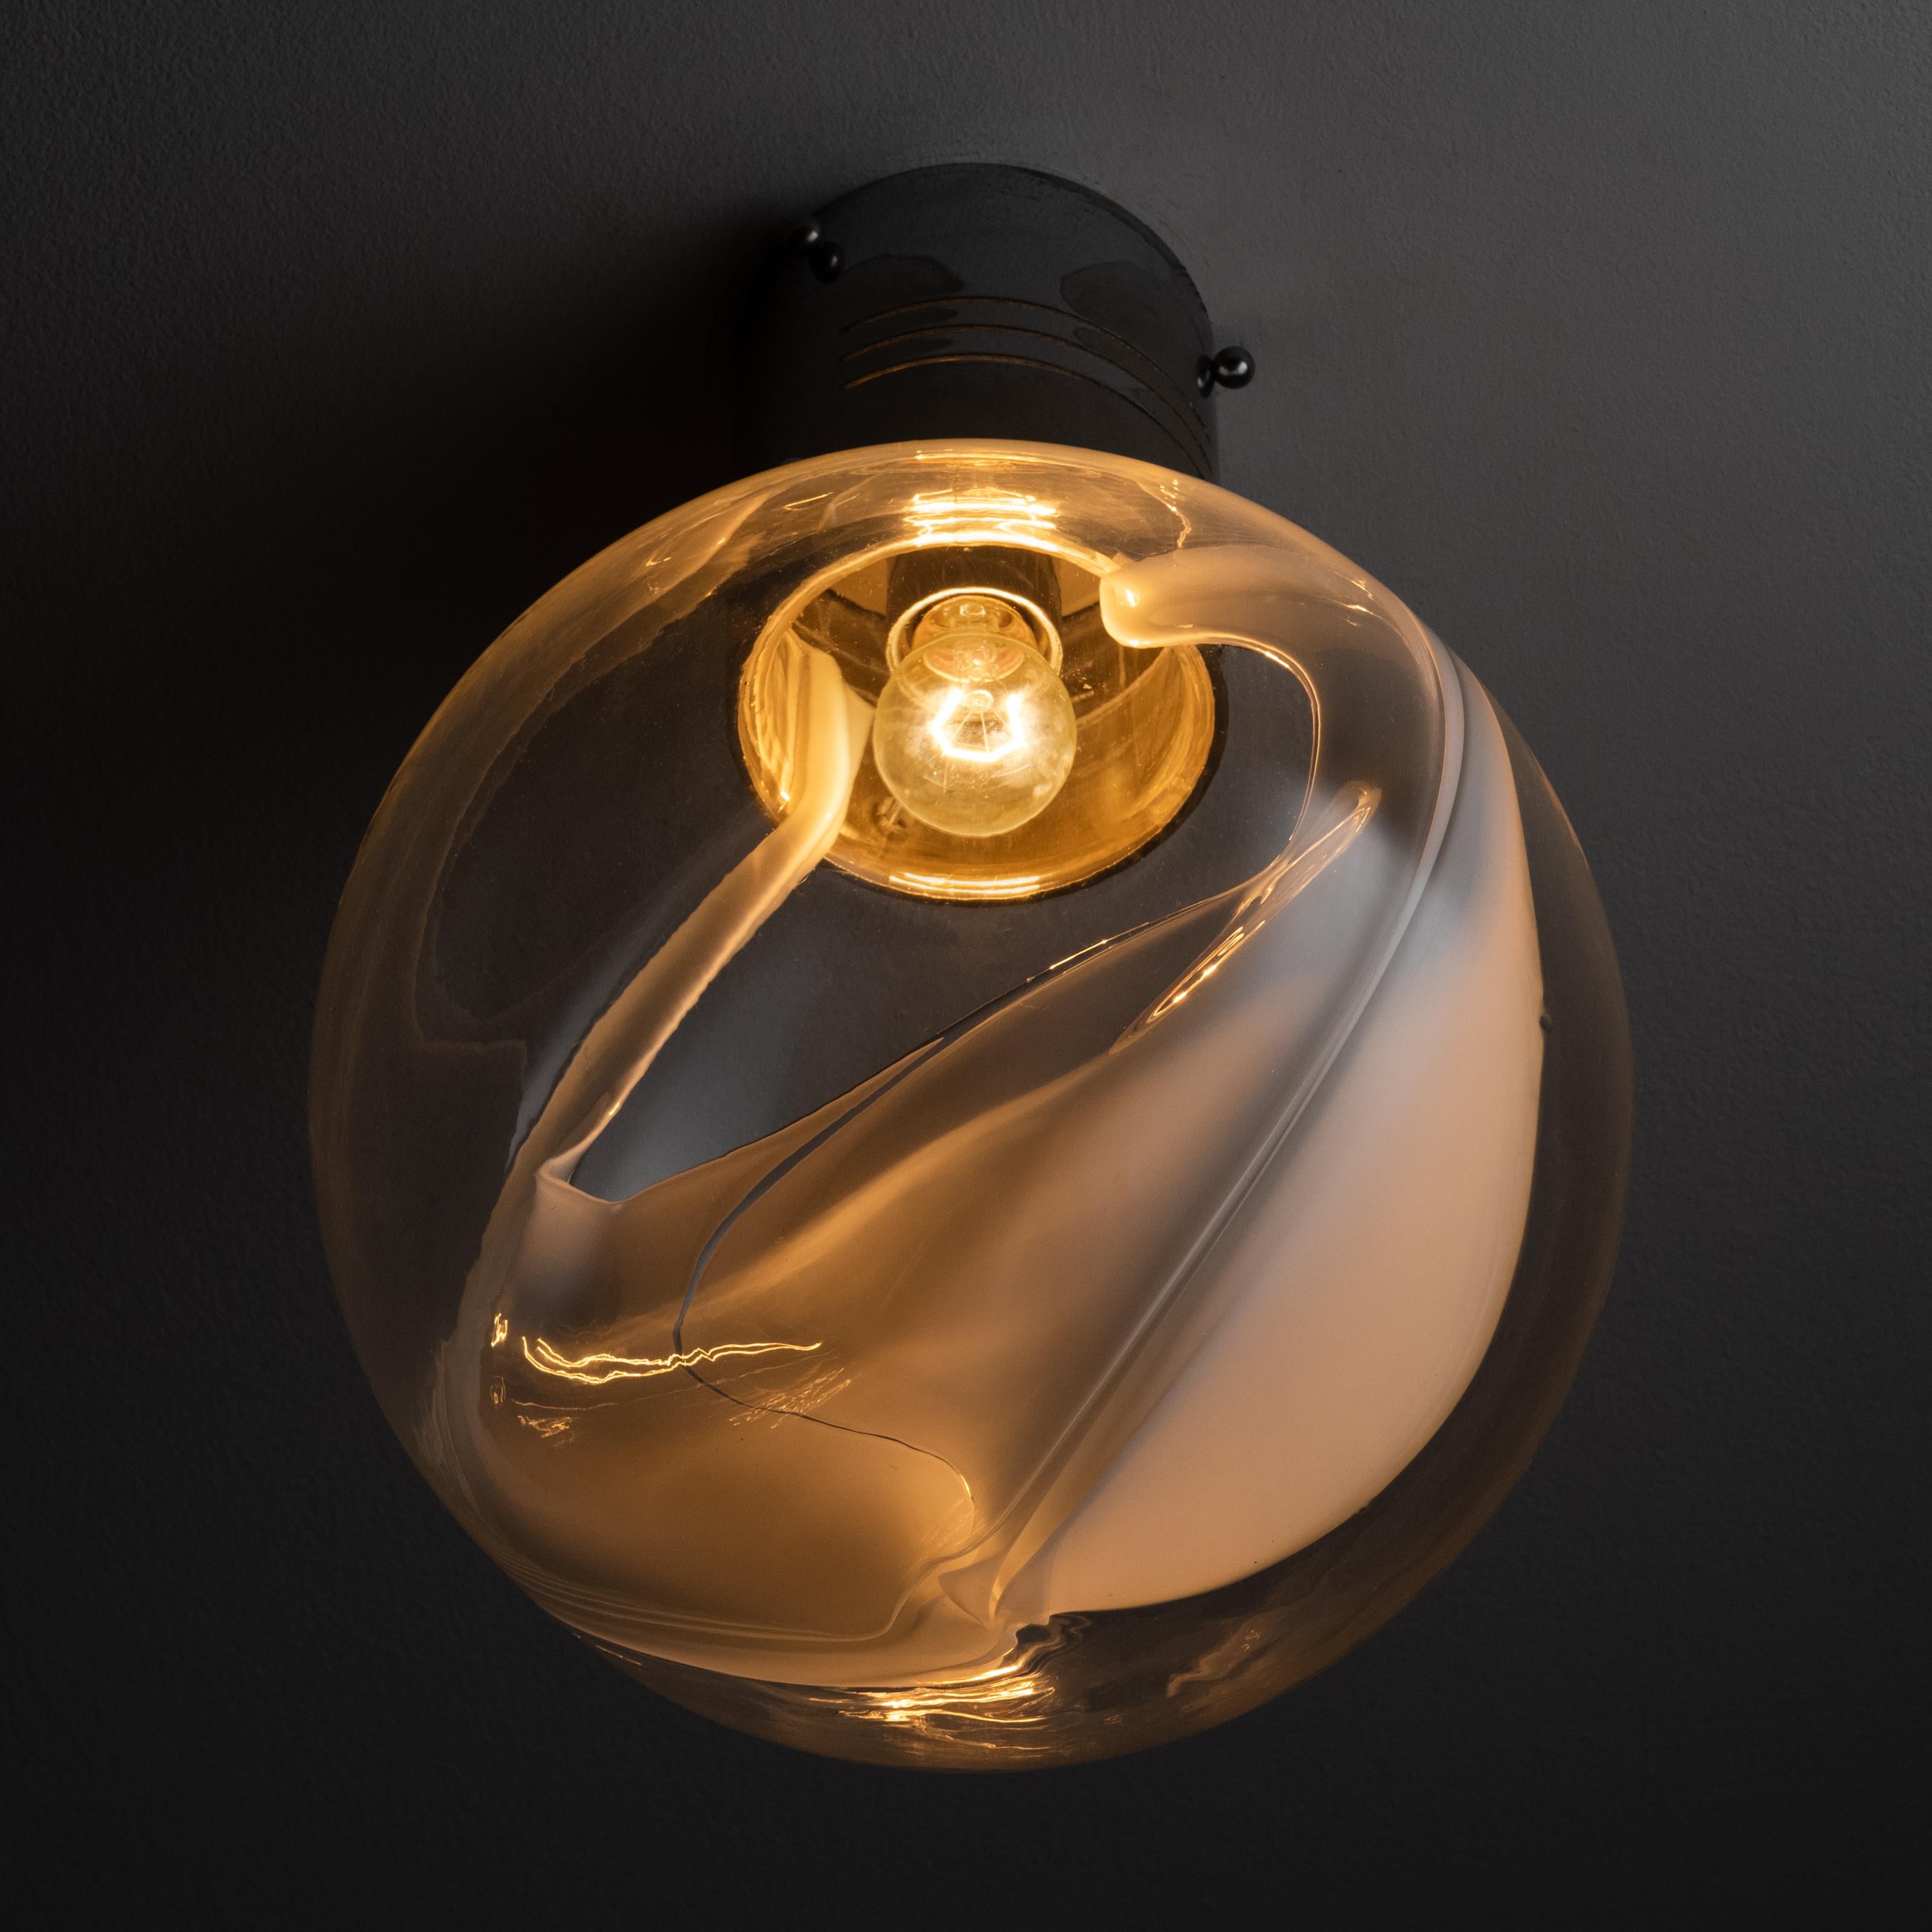 Ceiling flush mounts by Toni Zuccheri for Venini. Spherical lamp shades with hand blown membrane-like glass interior detail, adhered to a cylindrical chrome base for a perfect flush mount effect. We recommend one E27 40w maximum bulb per sconce.